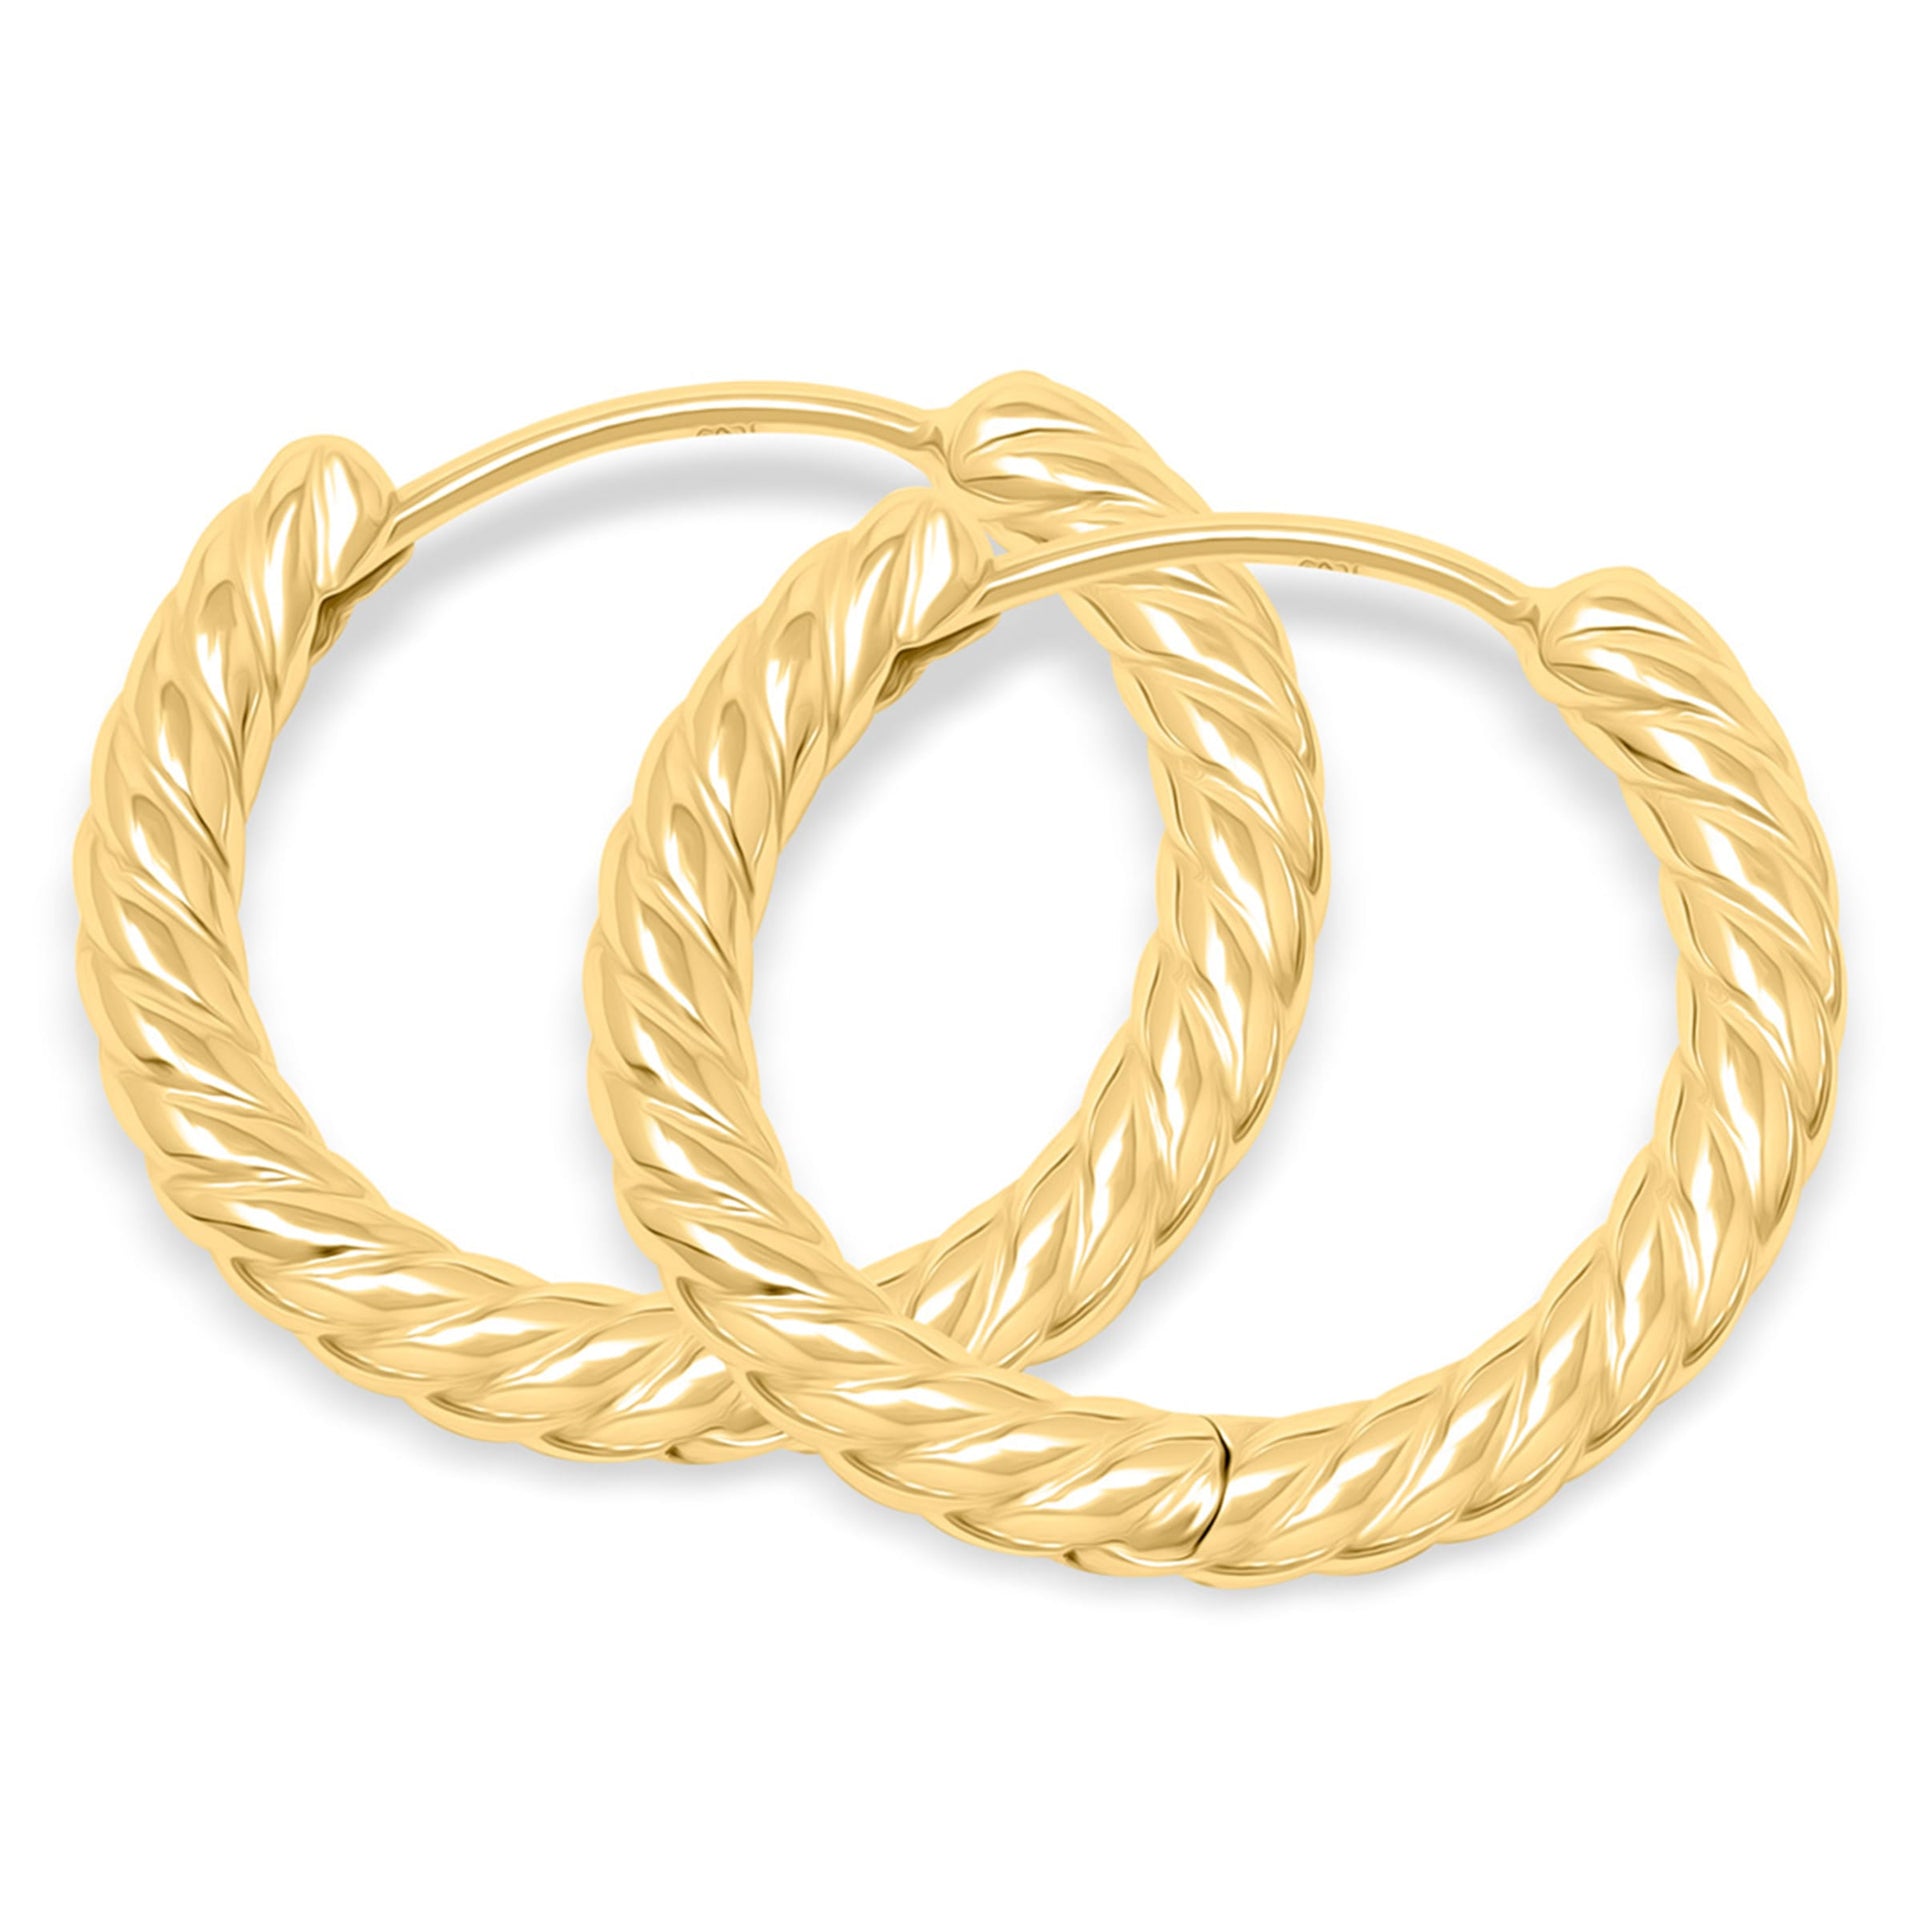 Unique twisted gold plated hoop earrings